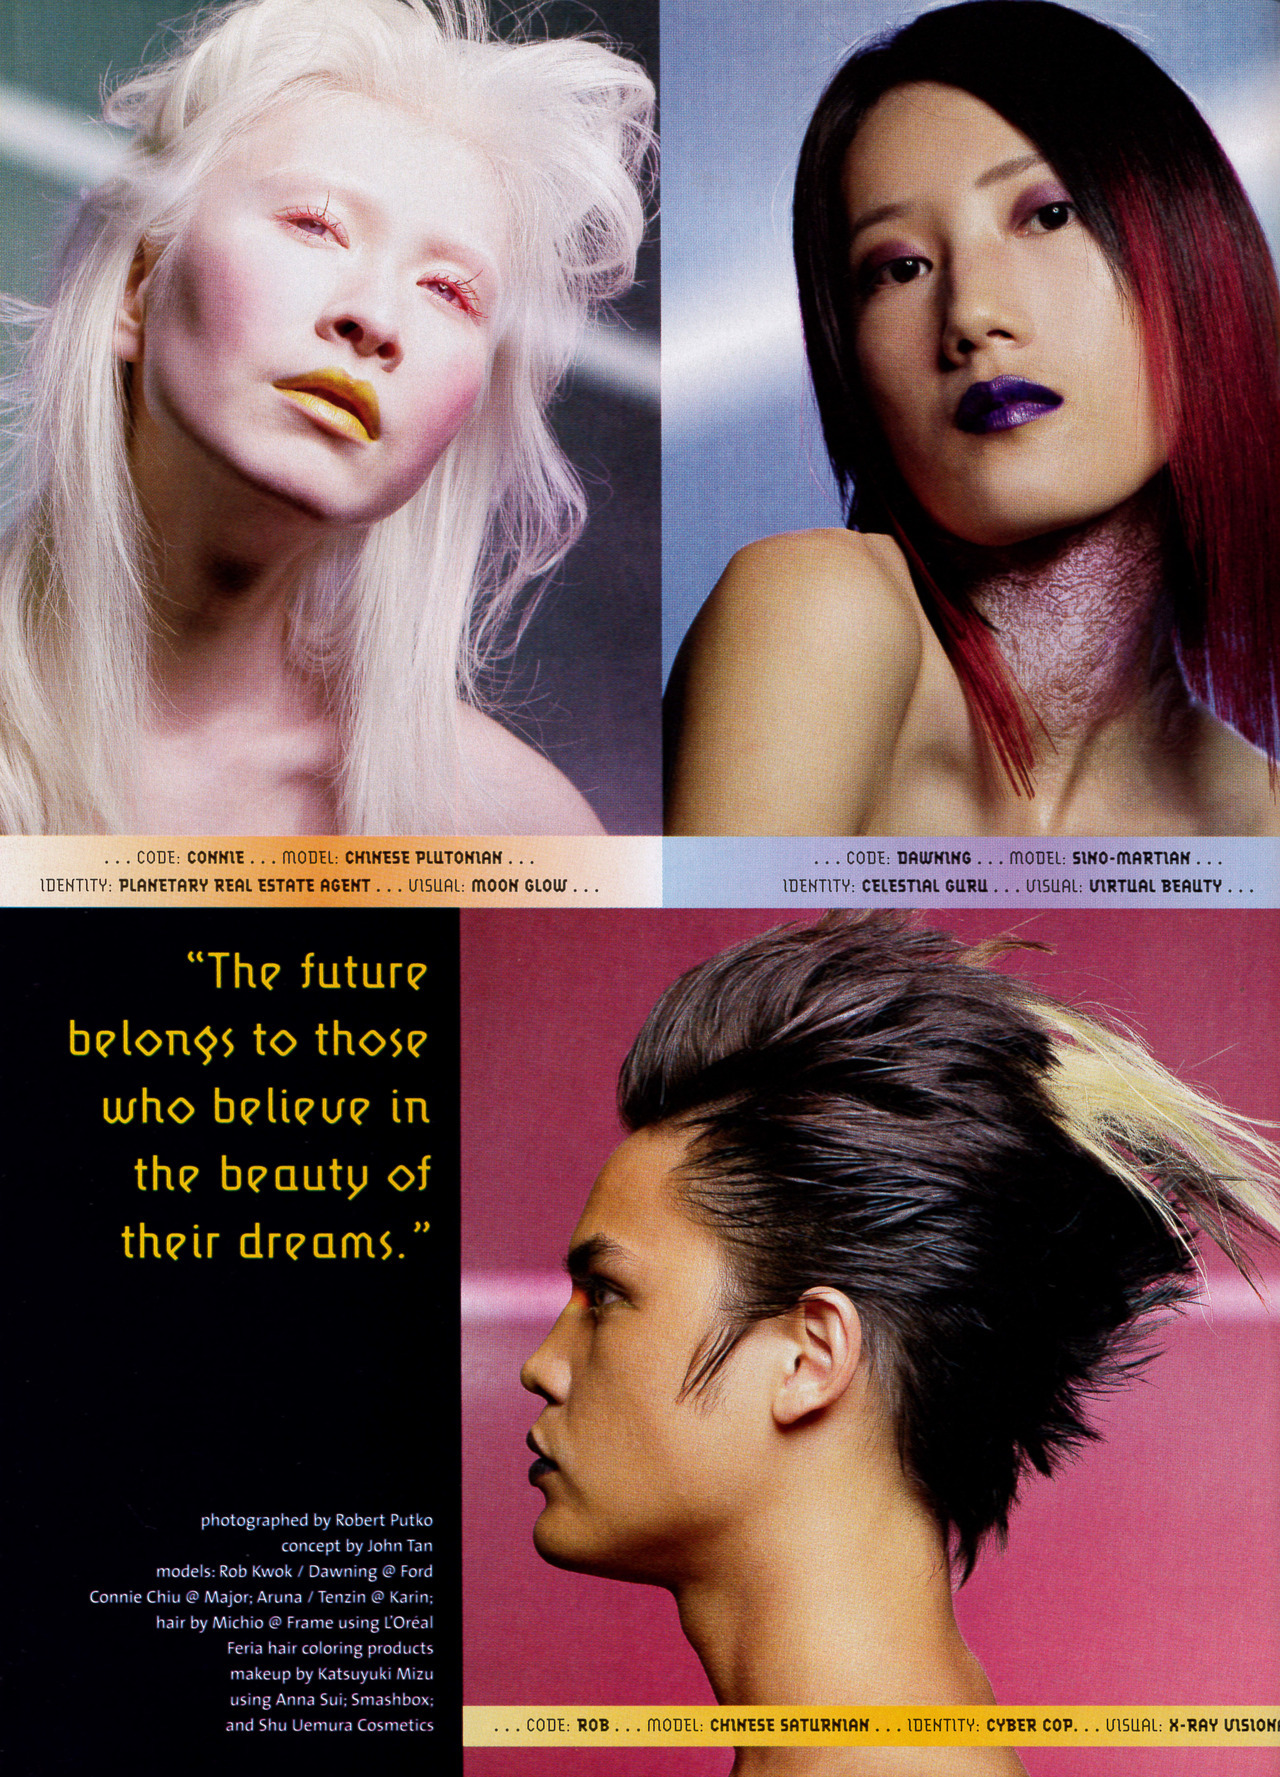 y2kaestheticinstitute:Scans from A. Magazine, an Asian-American focused publication